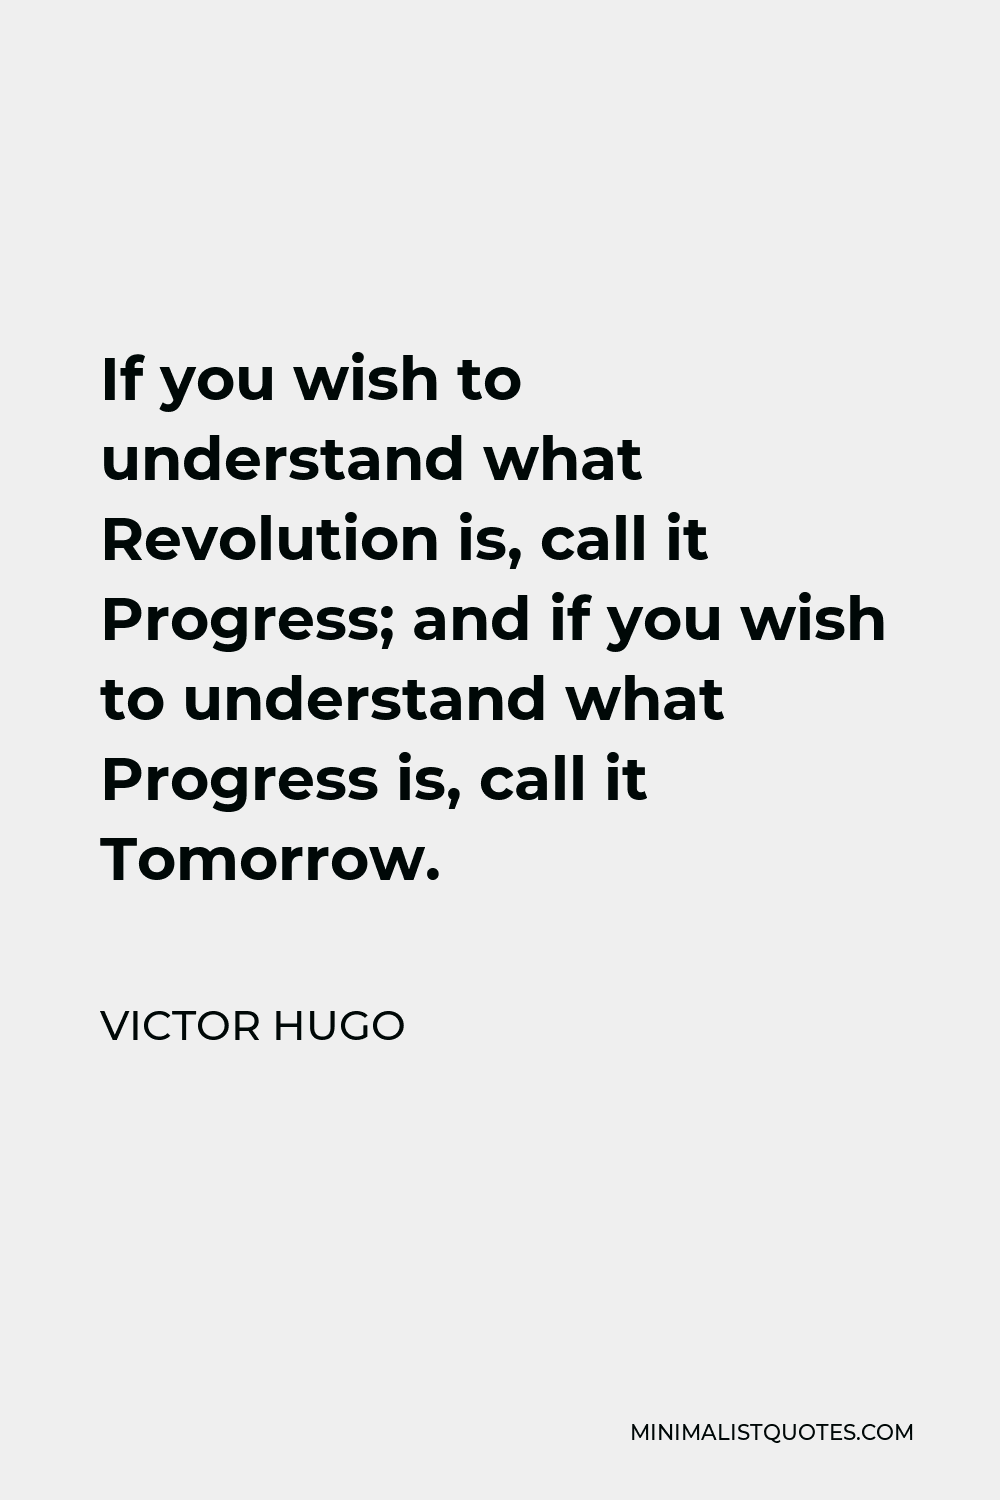 Victor Hugo Quote - If you wish to understand what Revolution is, call it Progress; and if you wish to understand what Progress is, call it Tomorrow.